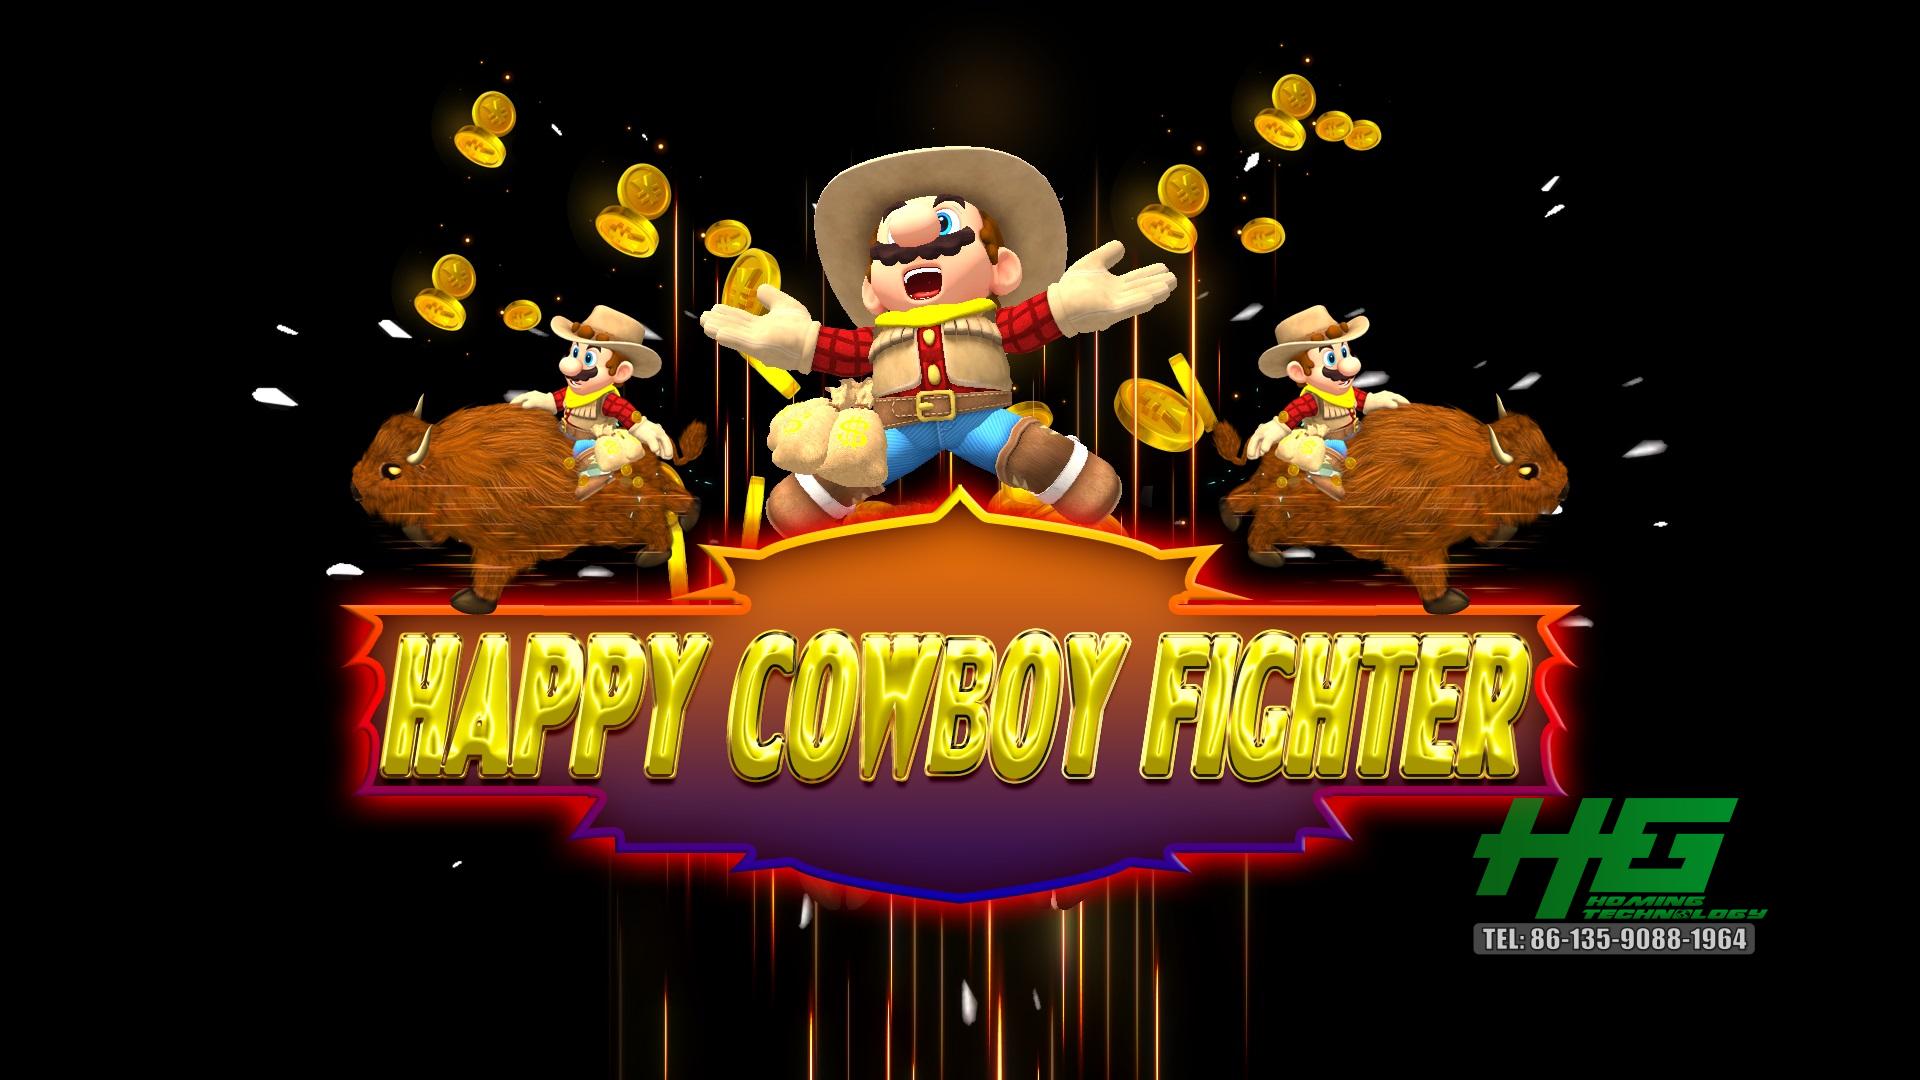 Newest High Holding Happy Cowboy Fighter Fishing Game For Sale